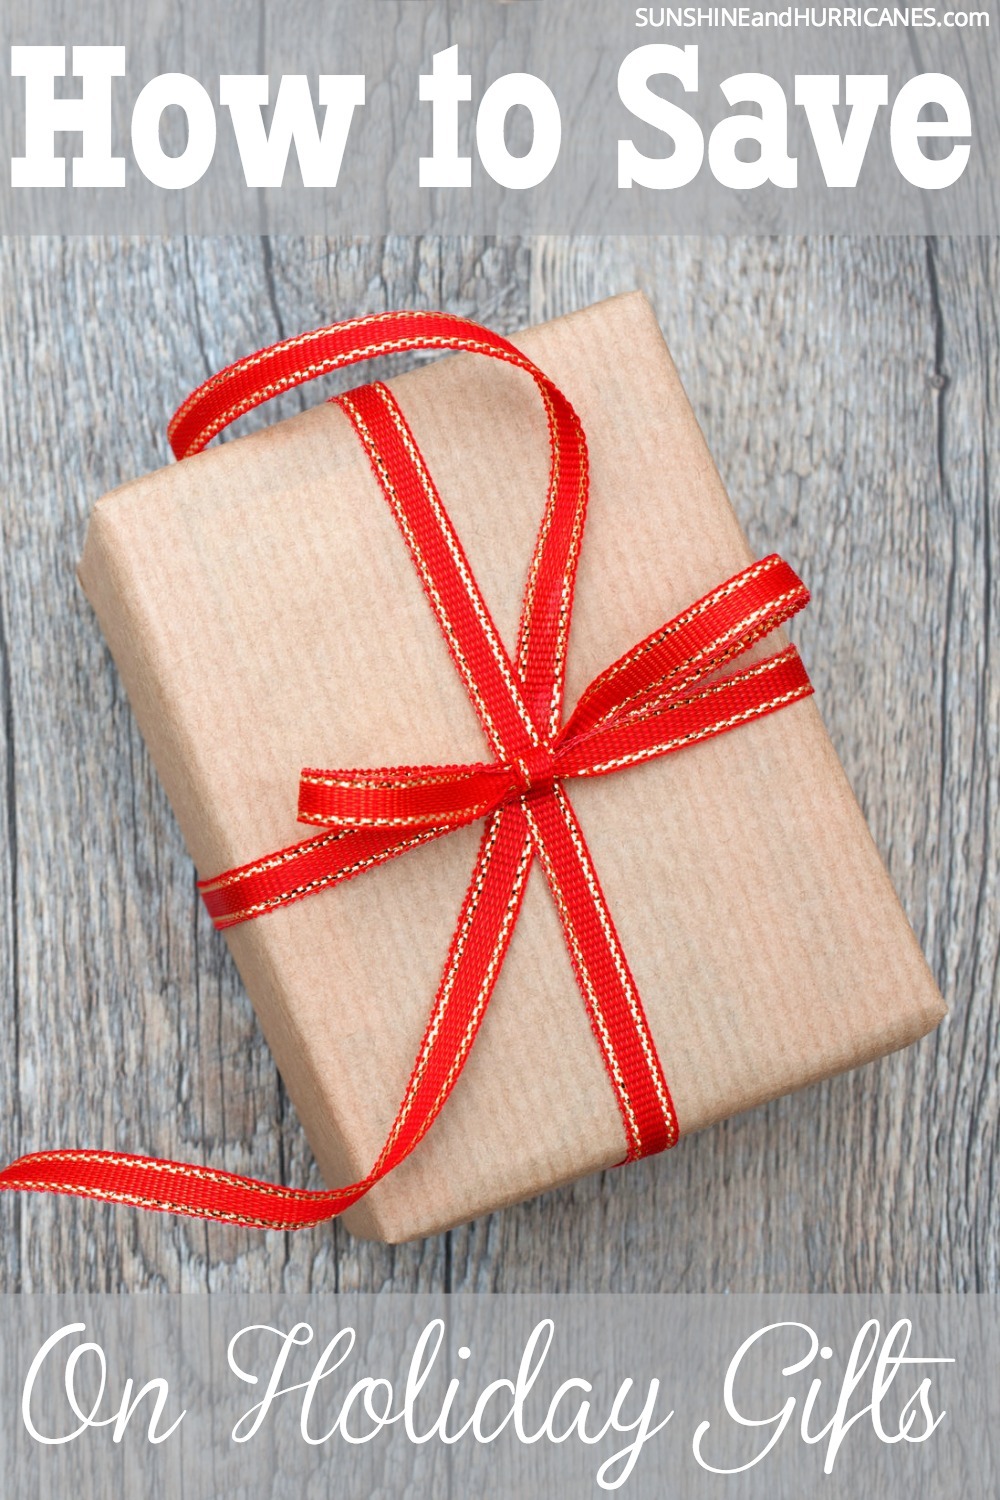 We all want to be able to give gifts that people will appreciate, but we also have to make sure we don't overspend or rack up unnecessary debt. Here are some tips and tricks for how to save on holiday gifts while still giving generously. SunshineandHurricanes.com